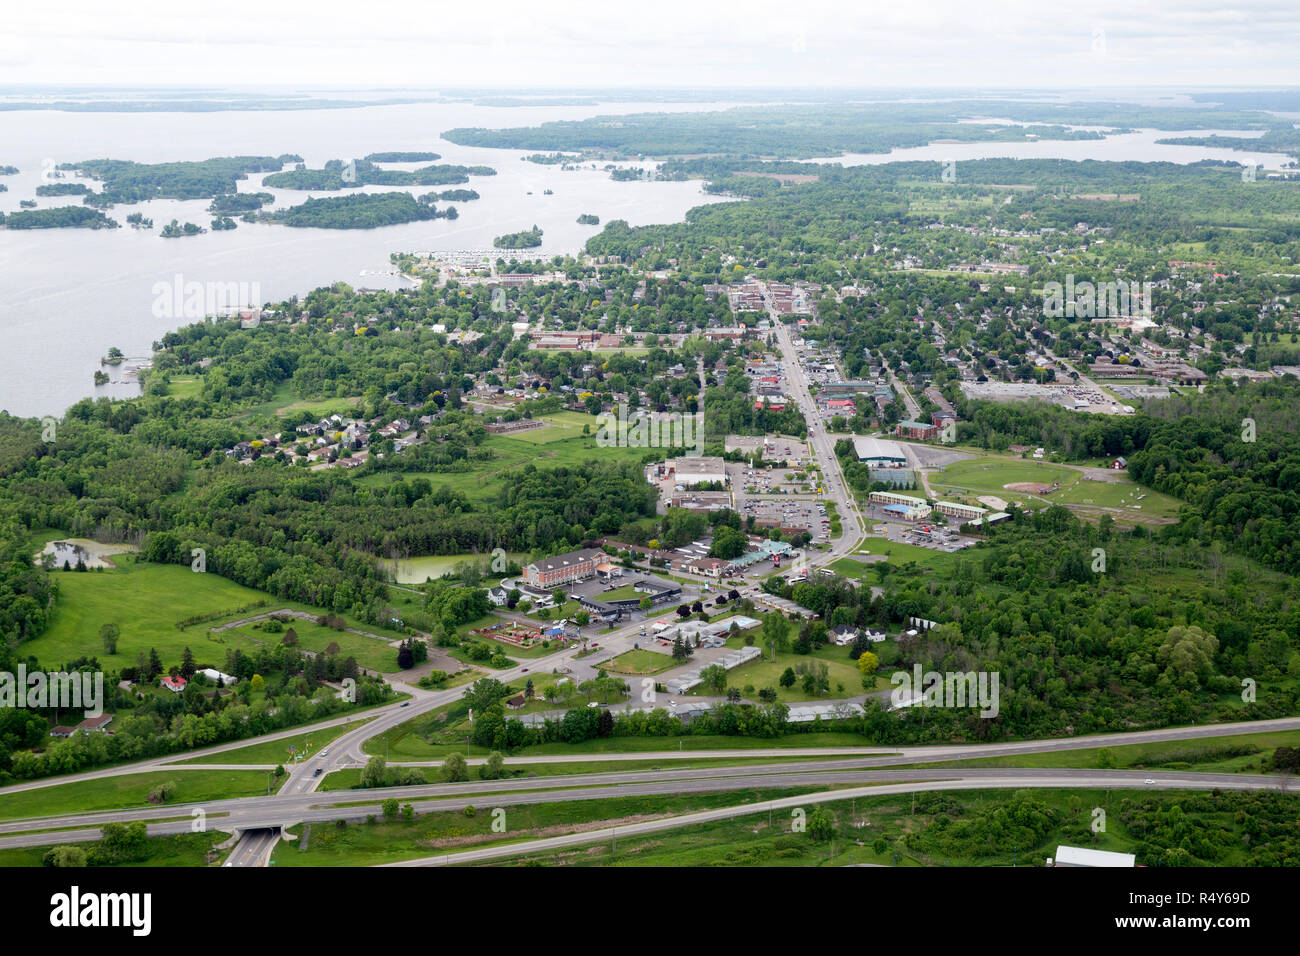 Aerial view of Gananoque in Ontario, Canada. The town is seen as a gateway to the Thousand Islands region, on the border of the USA and Canada. Stock Photo